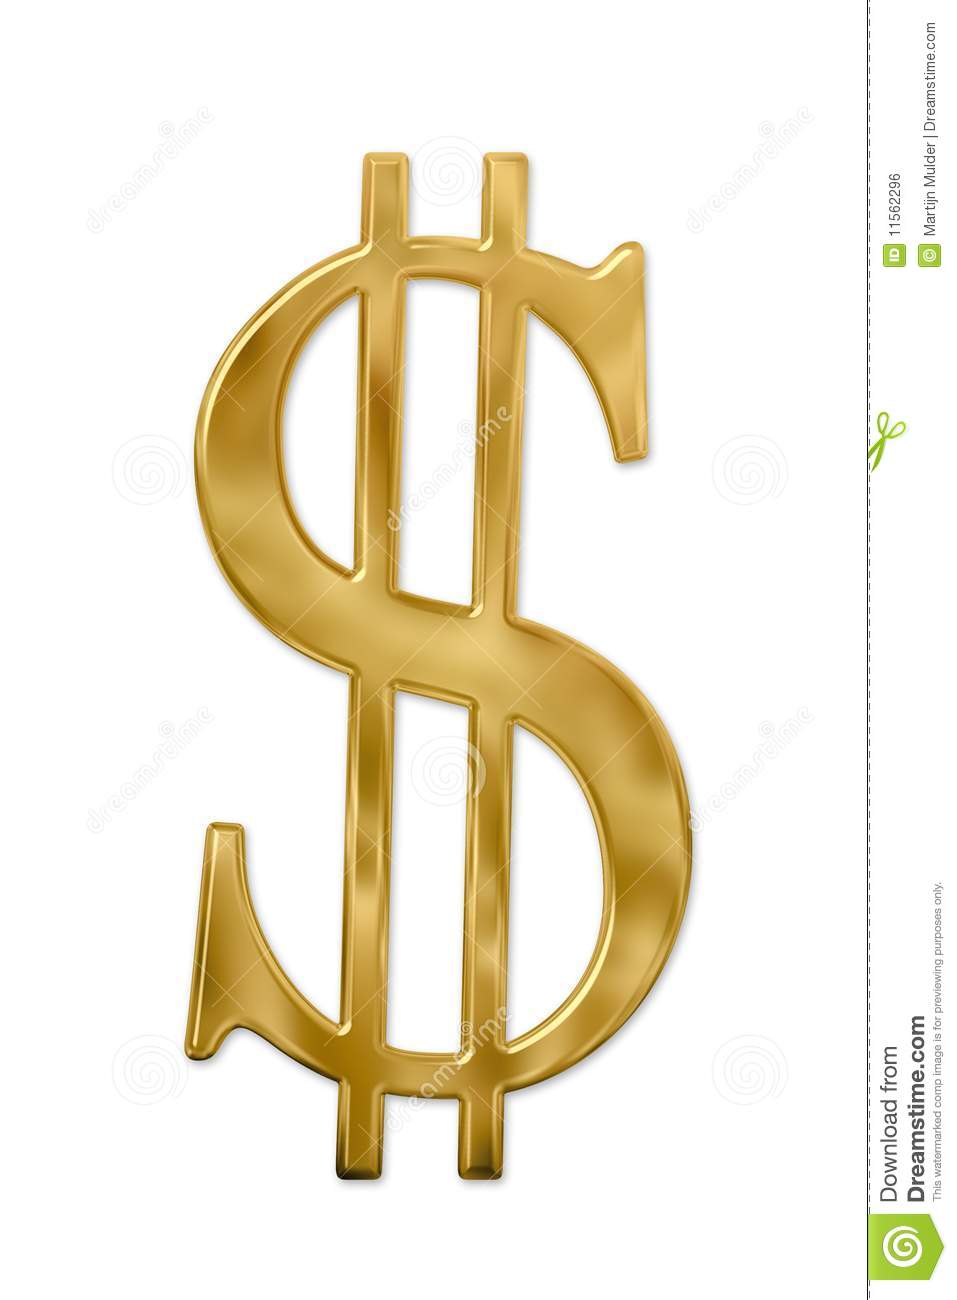 Gold Or Golden Dollar Sign  Isolated On White  Clipping Path Included